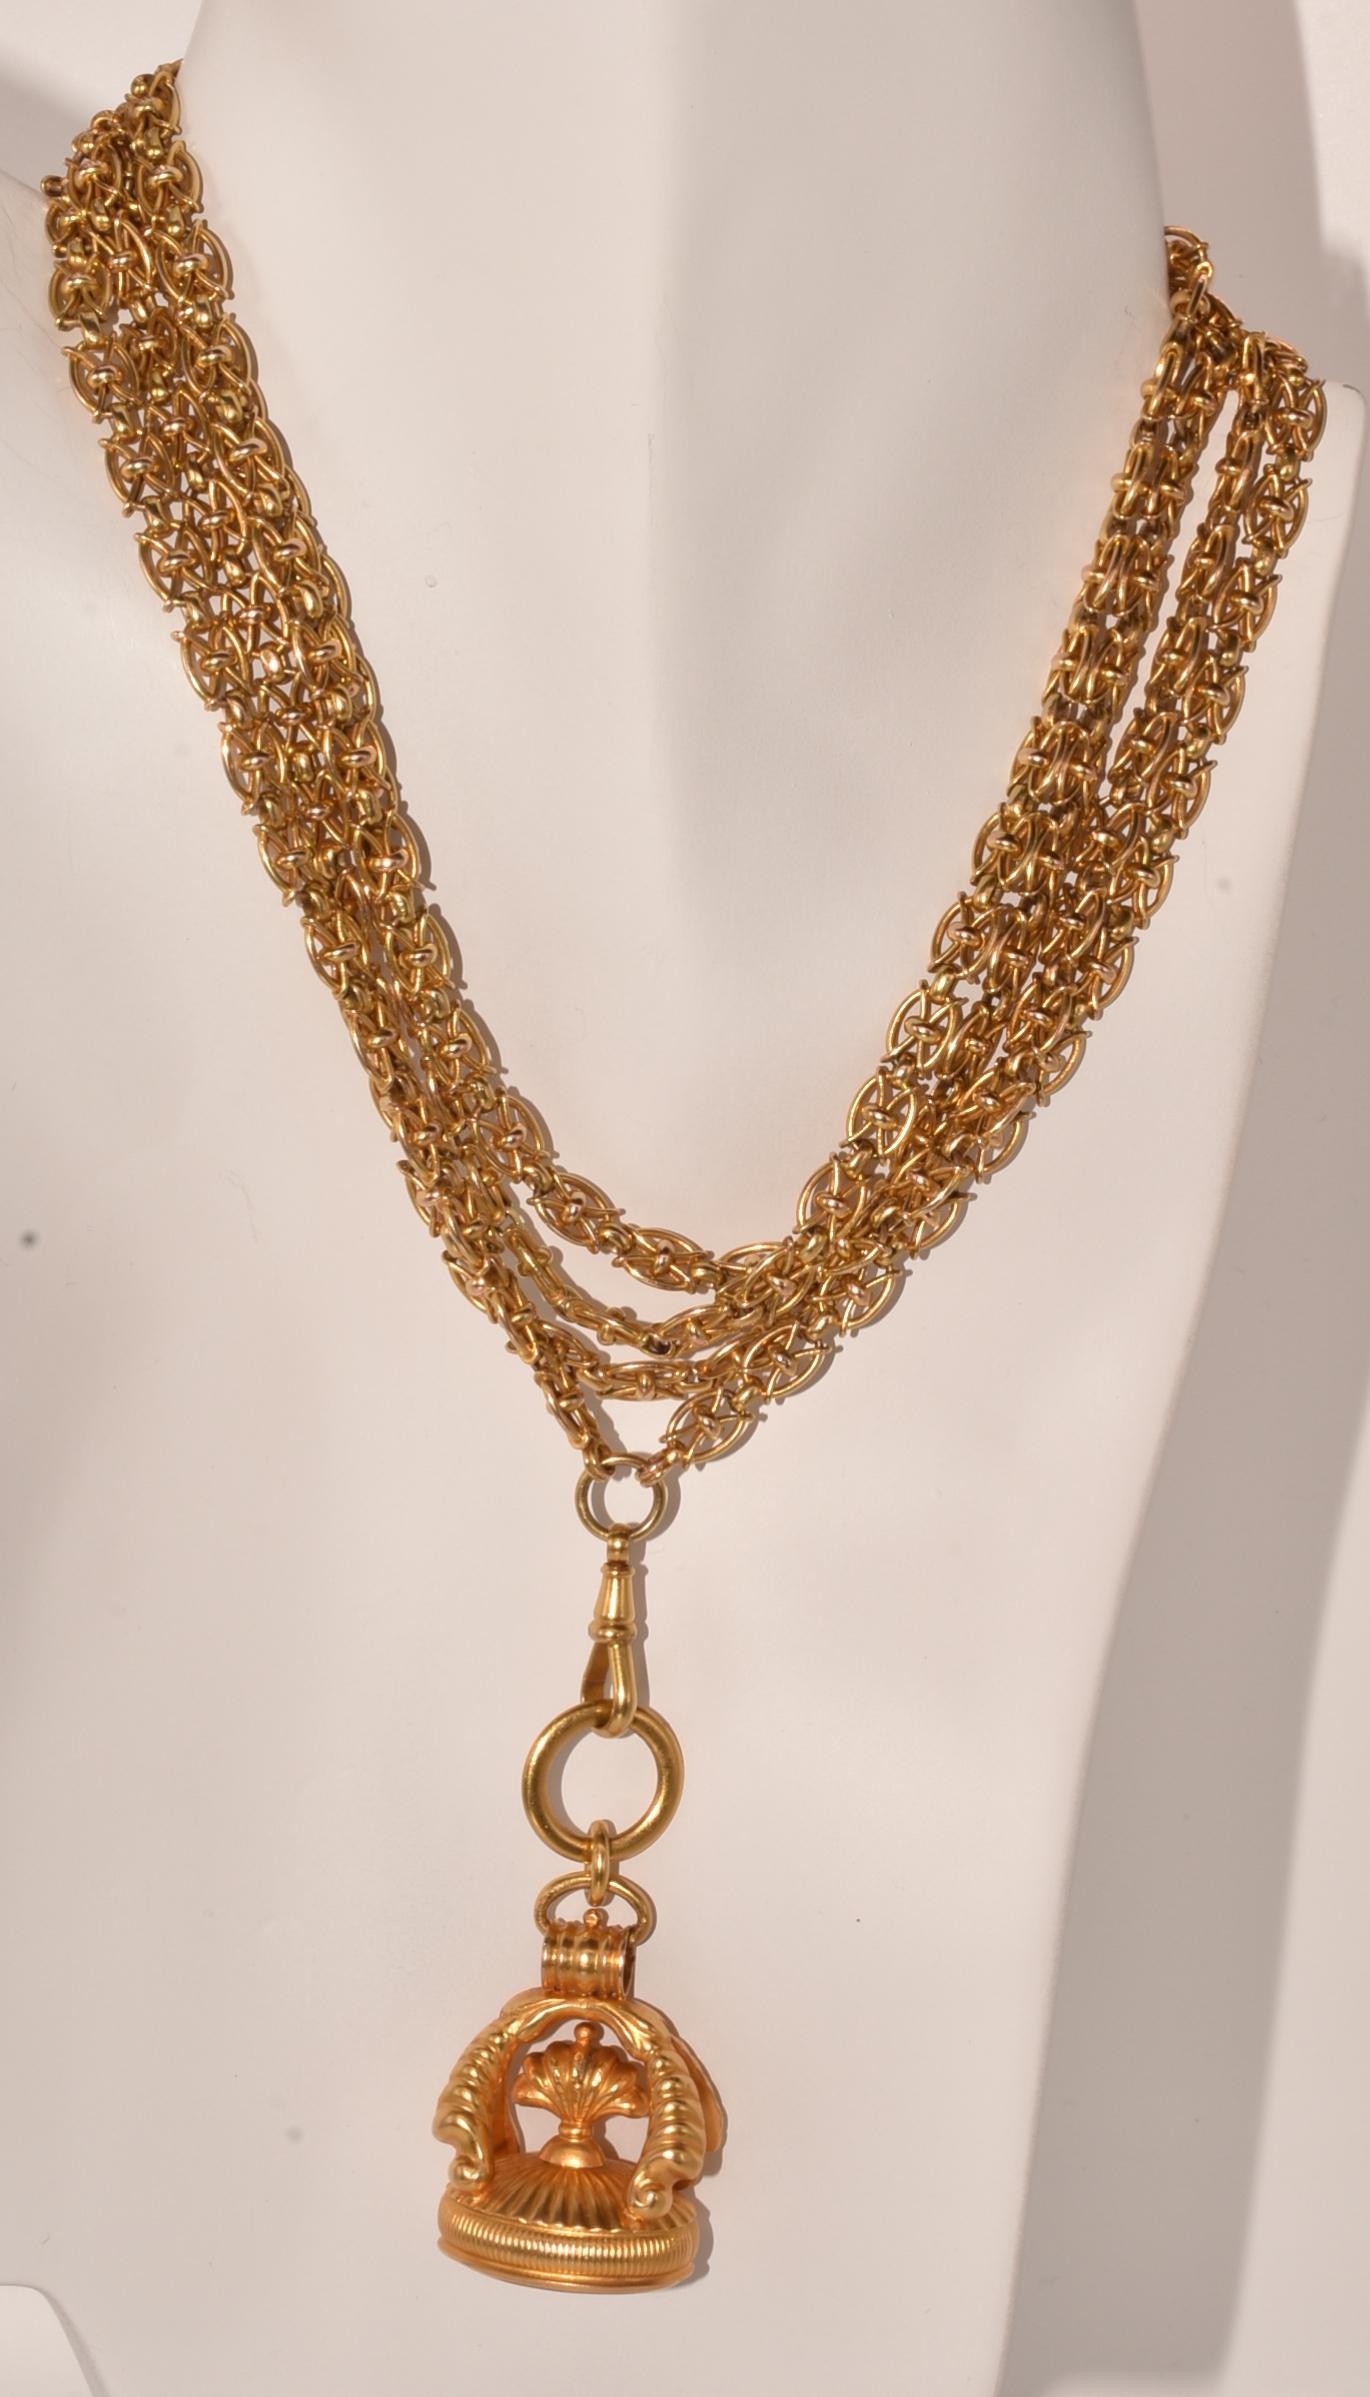 This fancy link English chain is solid, sturdy and beautiful, original watch chain. in its original length. The chain dates to C1900 and  measures 61 inches including the hook. It has an 18K ring from which an 18K dog tag is attached, ready for your